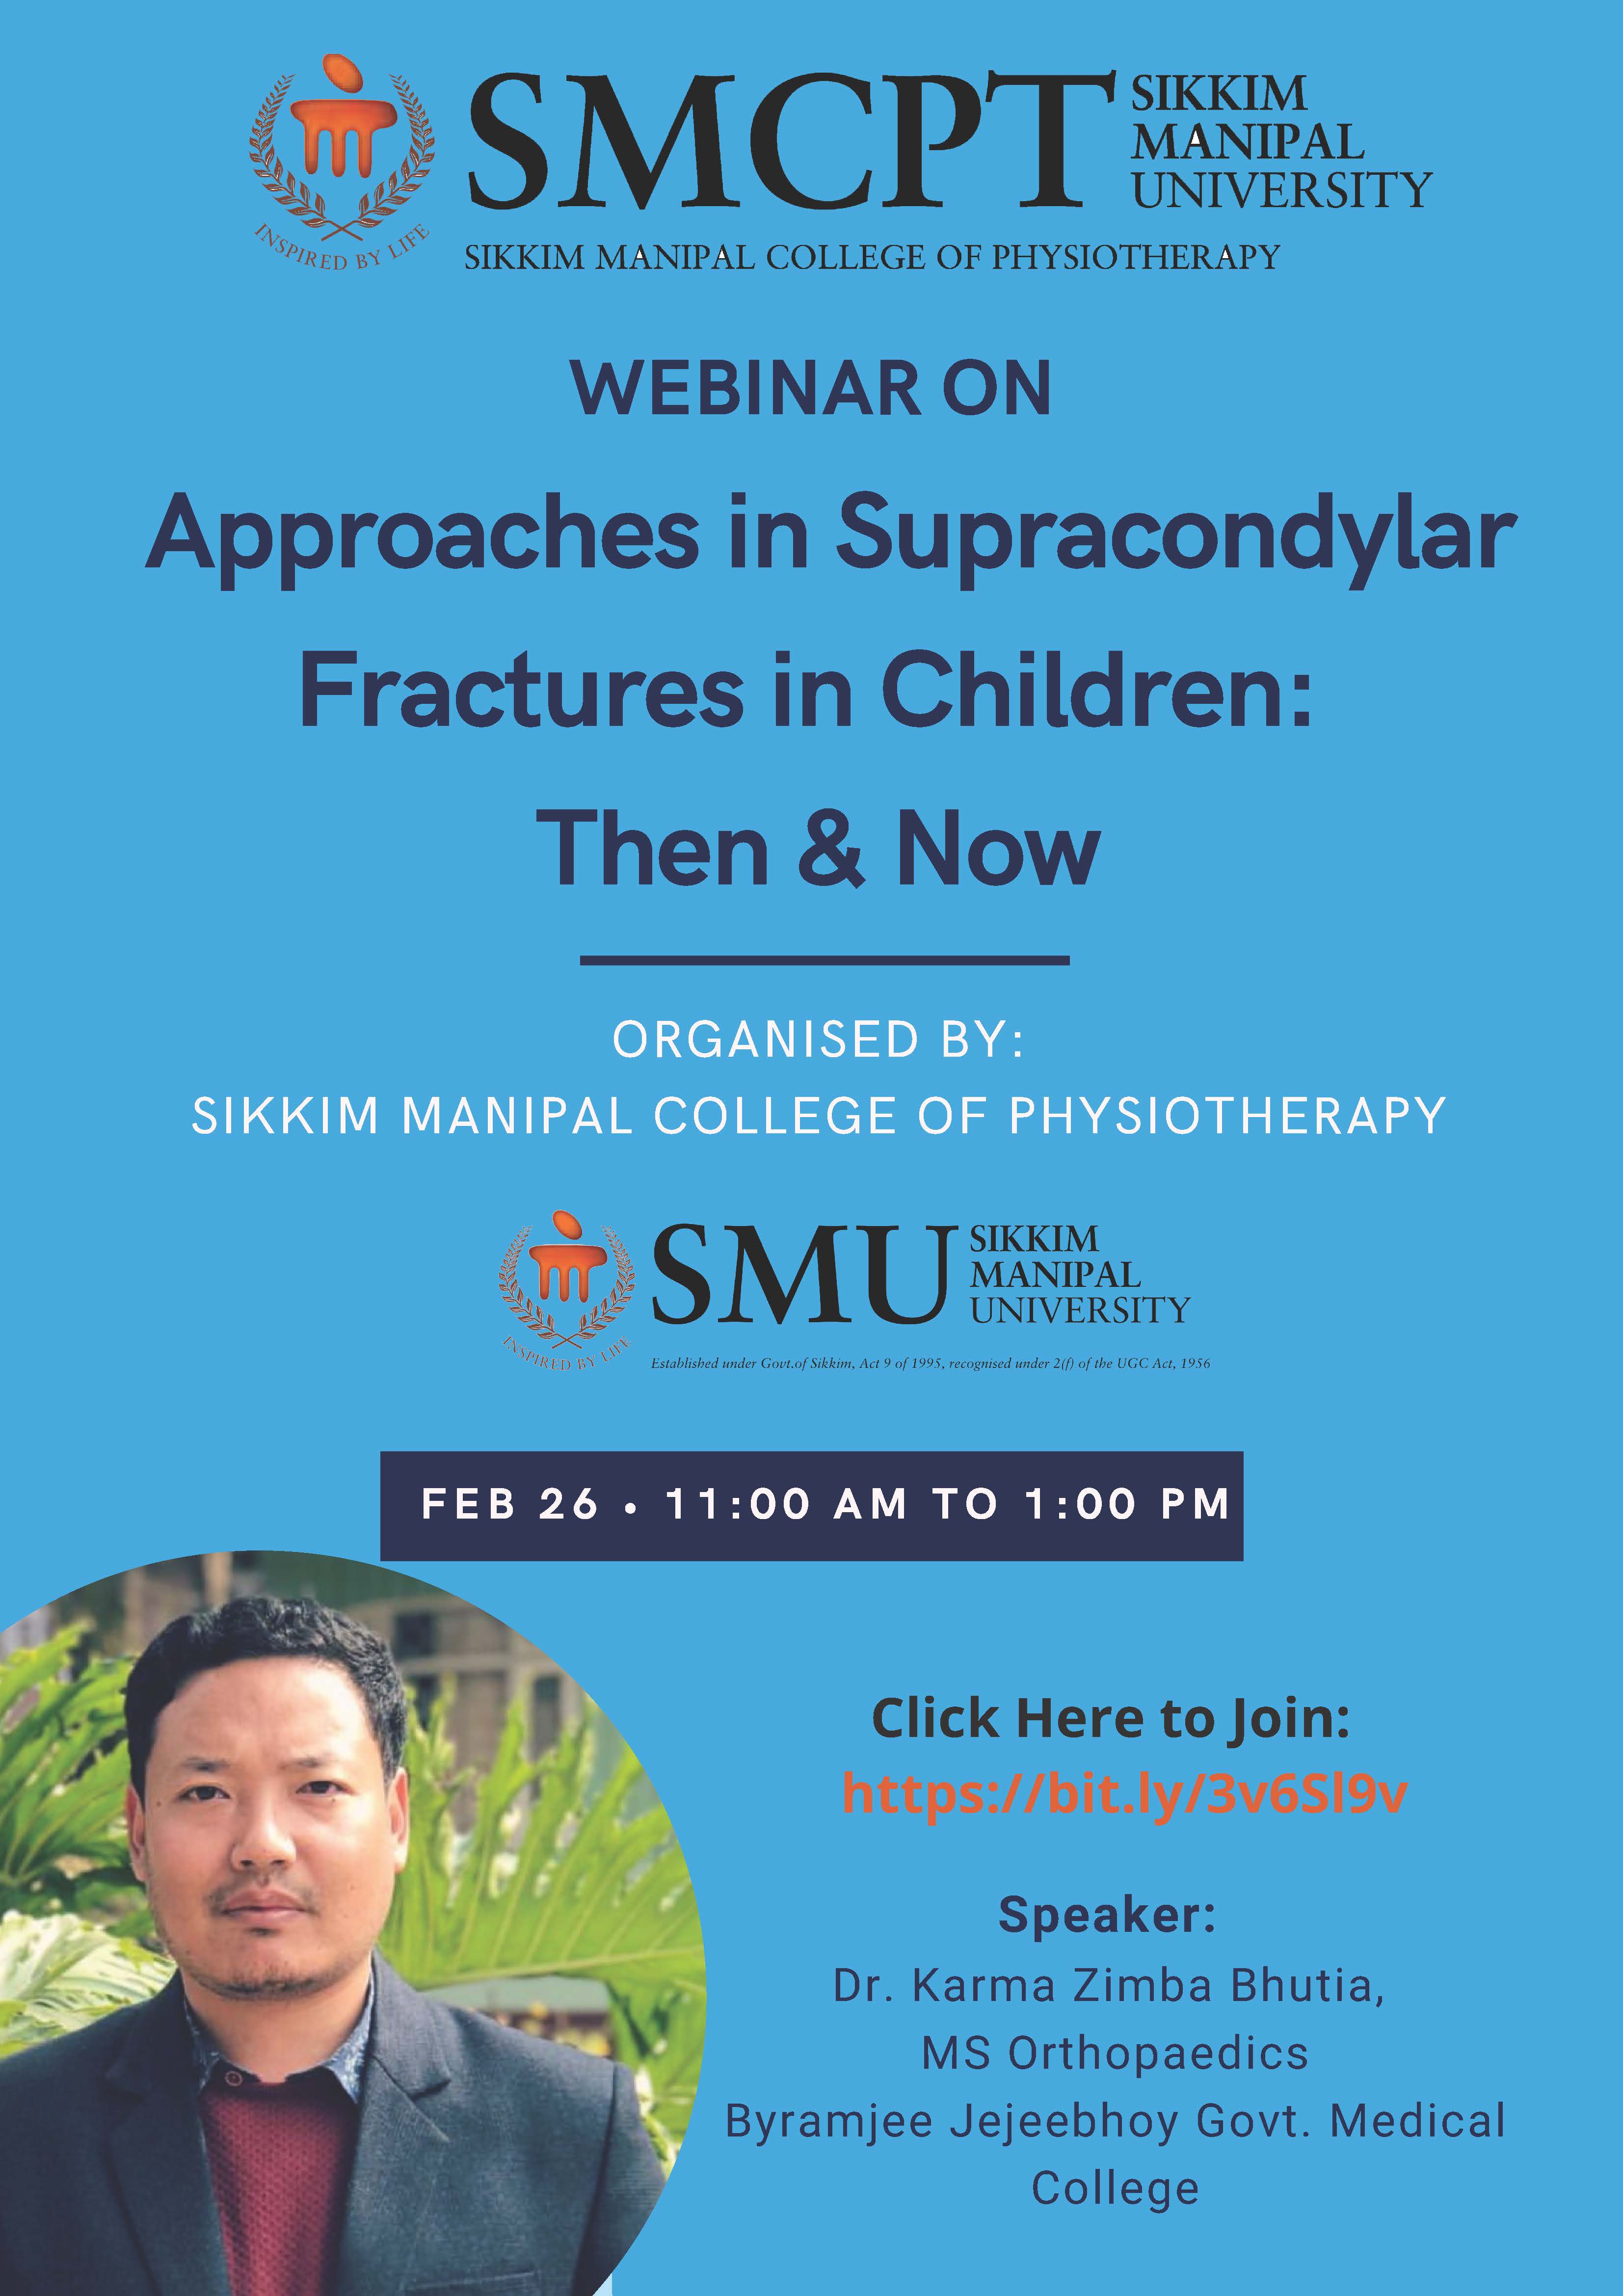 WEBINAR ON Approaches in Supracondylar Fractures in Children: Then & Now